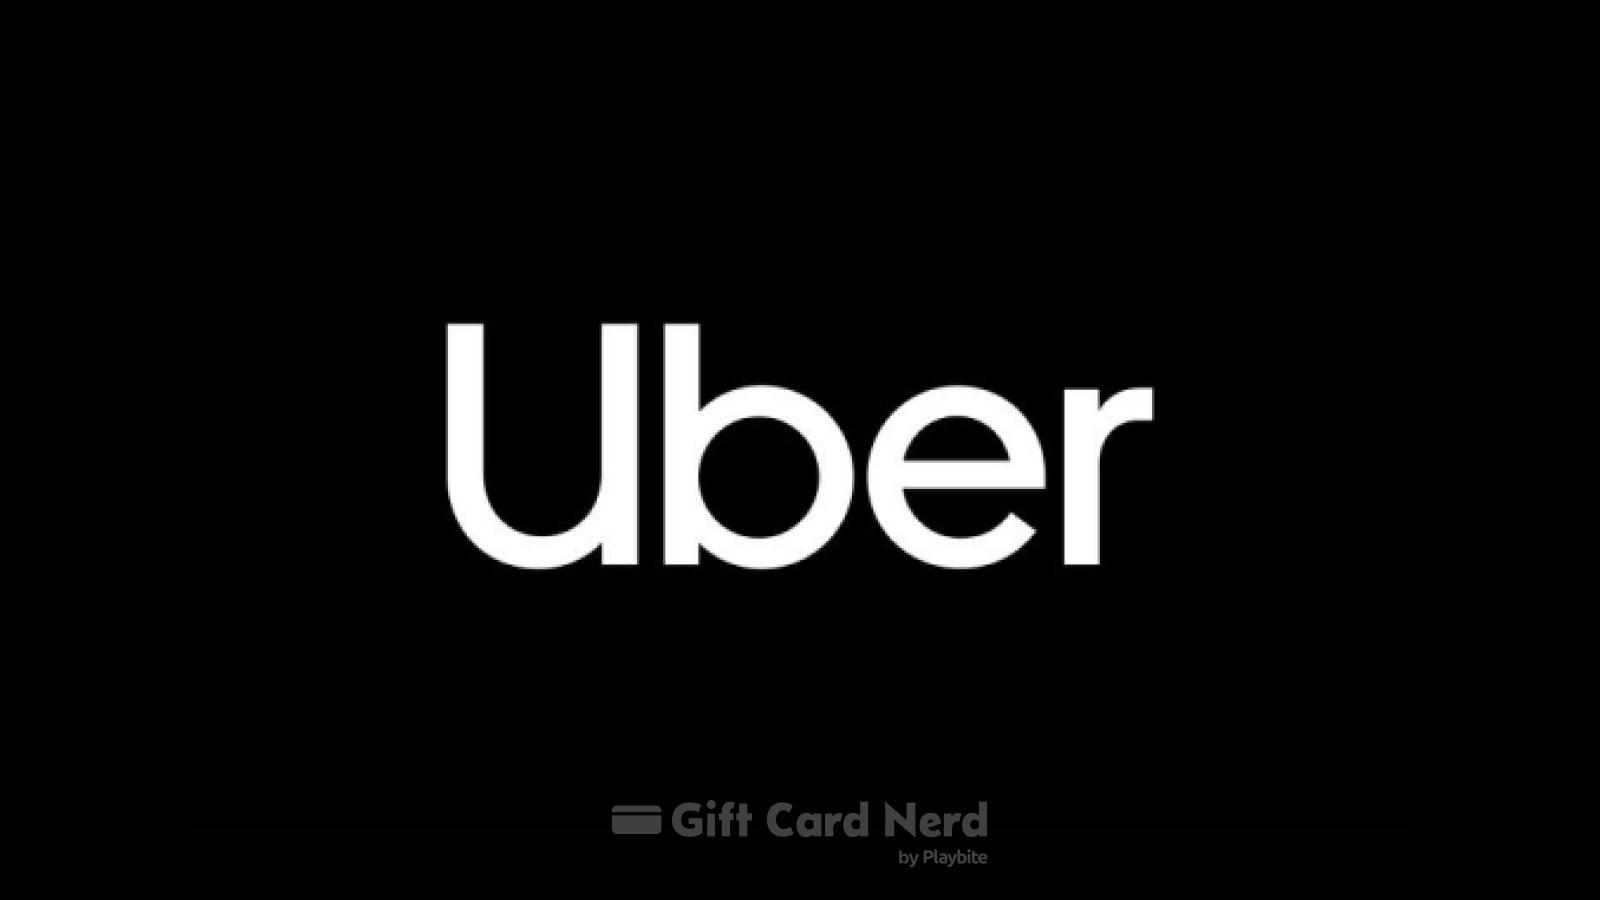 Can I Use an Uber Gift Card on DoorDash?